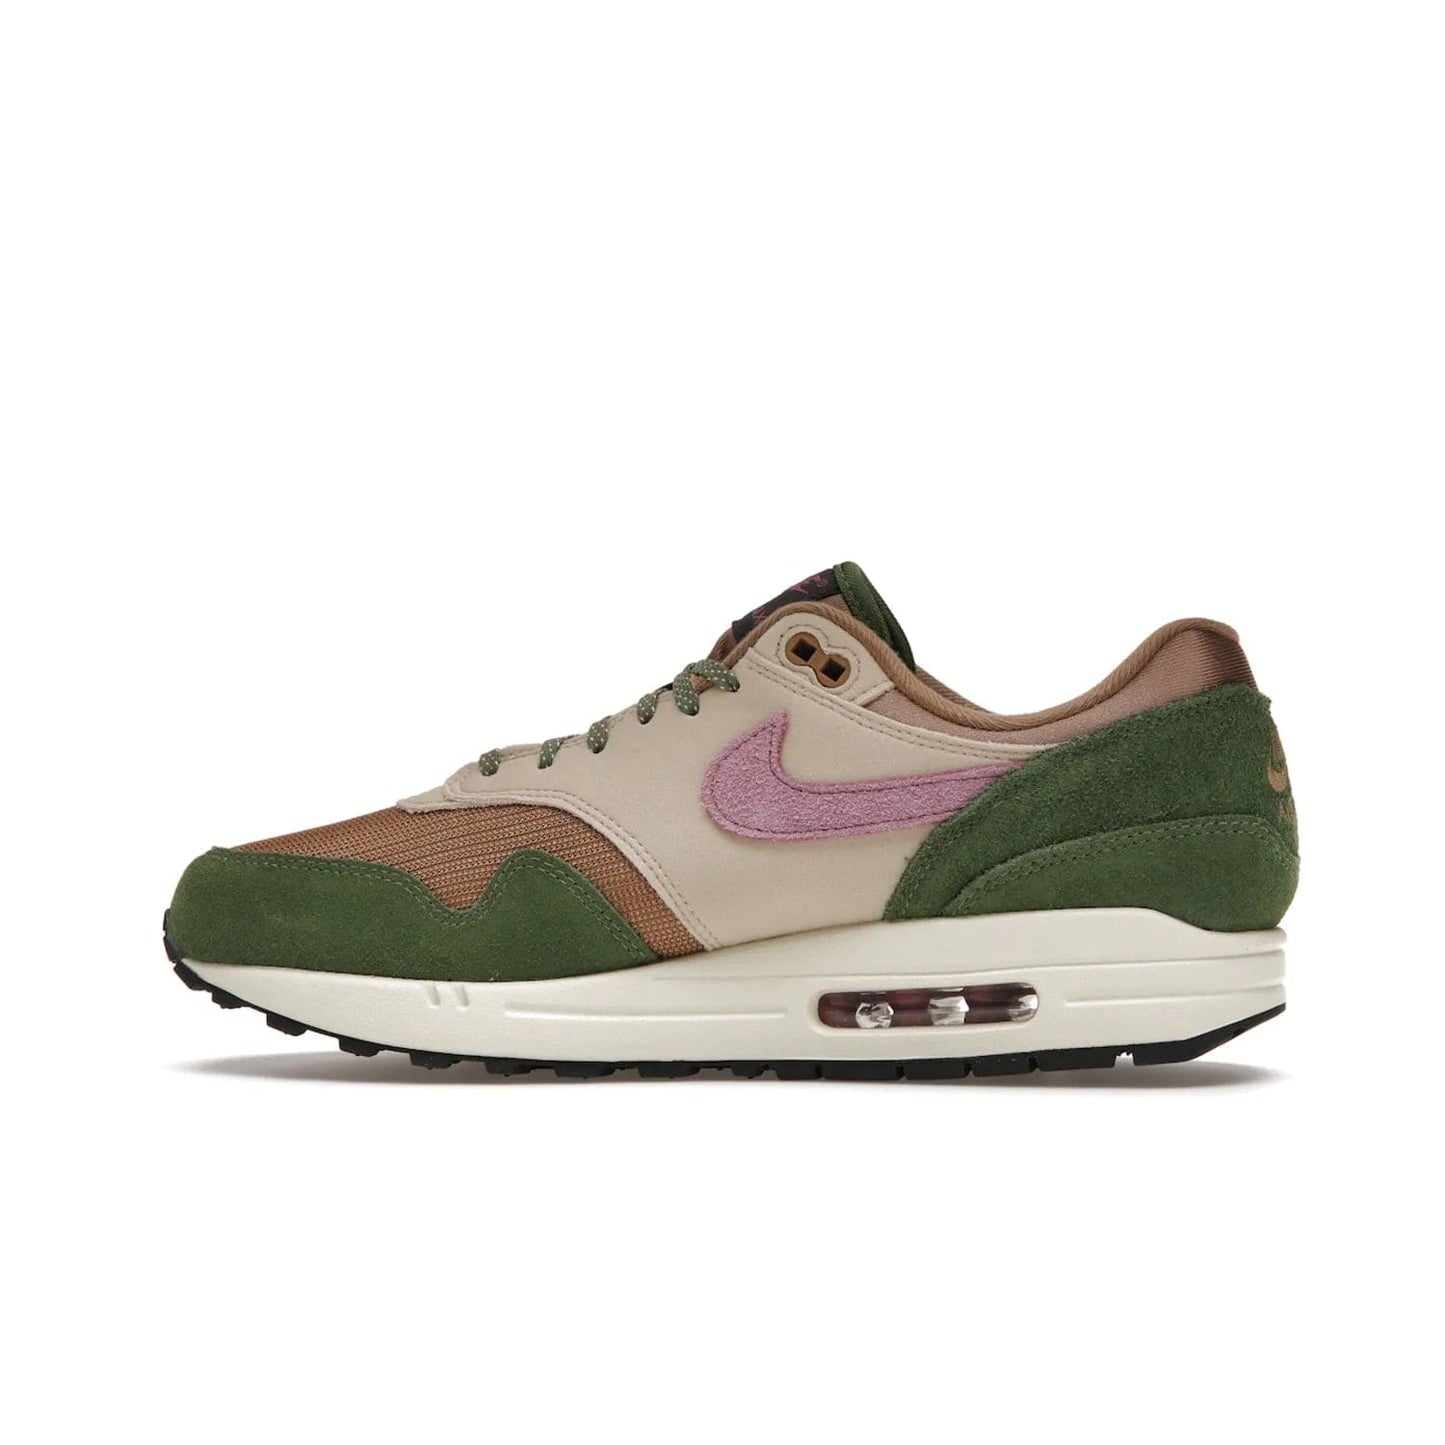 Nike Air Max 1 SH Treeline - Image 20 - Only at www.BallersClubKickz.com - A classic Nike Air Max 1 SH Treeline with a brown mesh upper, taupe Durabuck overlays, and hairy green suede details. Light Bordeaux Swoosh and woven tongue label for a pop of color. Released in May 2022. Perfect for any outfit and sure to impress.